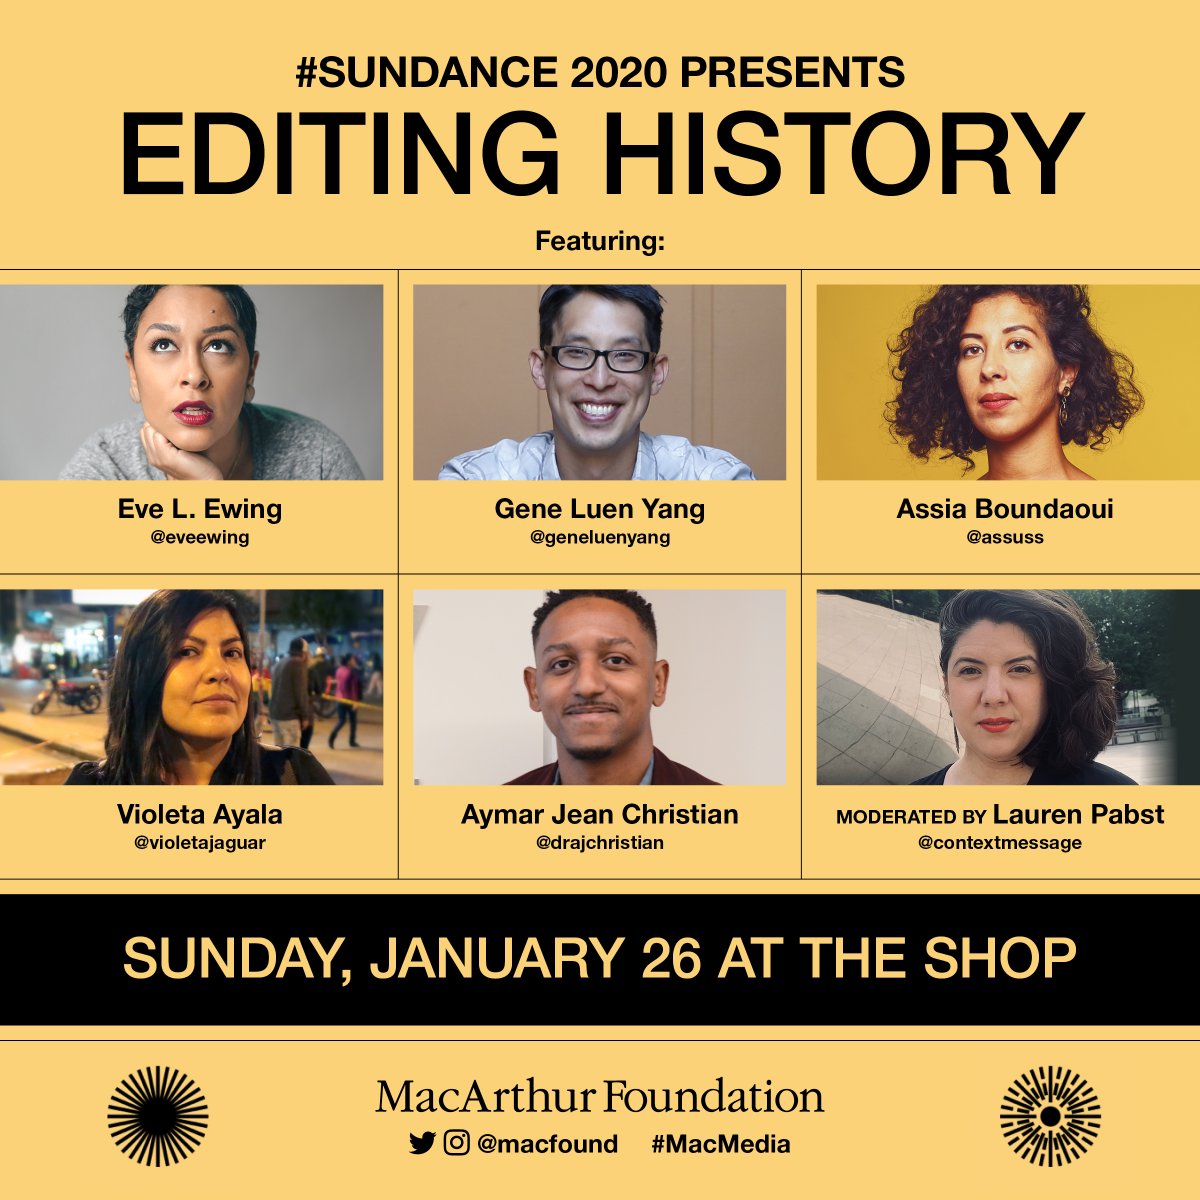 Right now at @sundancefest, MacArthur's @contextmessage will moderate a panel on crafting more accurate, just, and inclusive narratives. Follow the conversation: #MacMedia #Sundance 

@eveewing
@geneluenyang
@assuss
@violetajaguar 

Learn more: bit.ly/3aHnmny